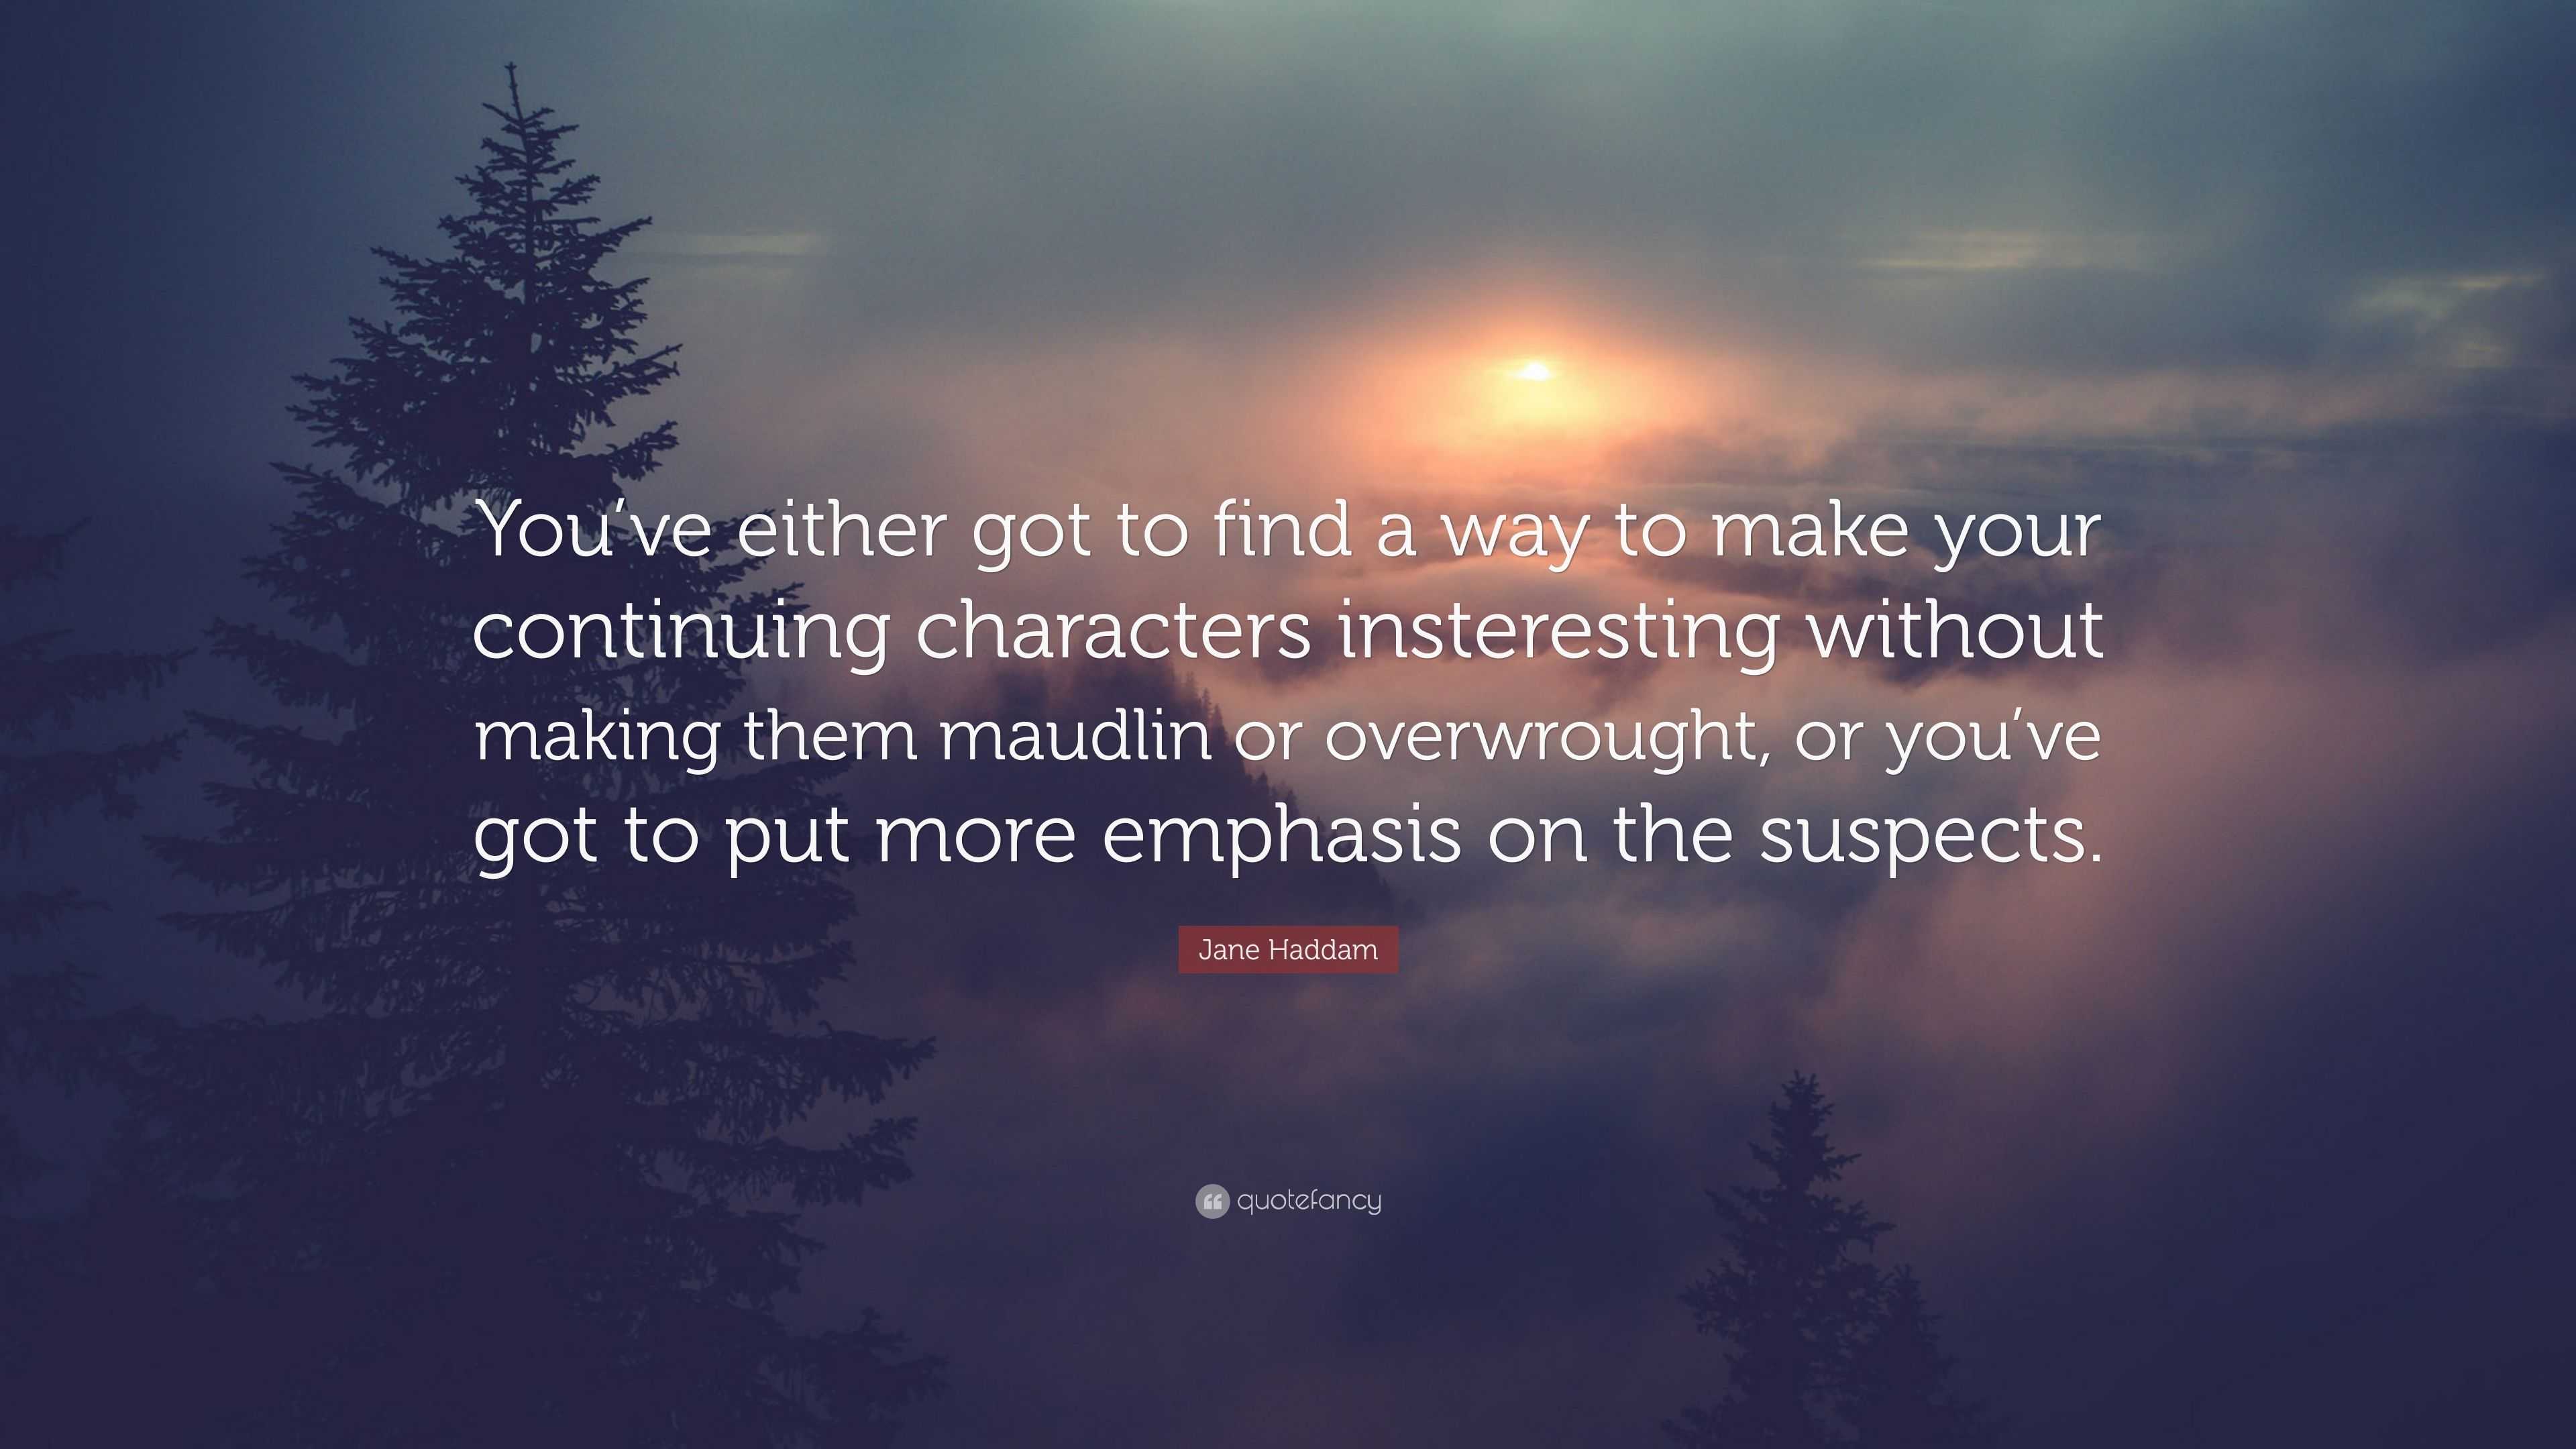 Jane Haddam Quote: “You’ve either got to find a way to make your ...